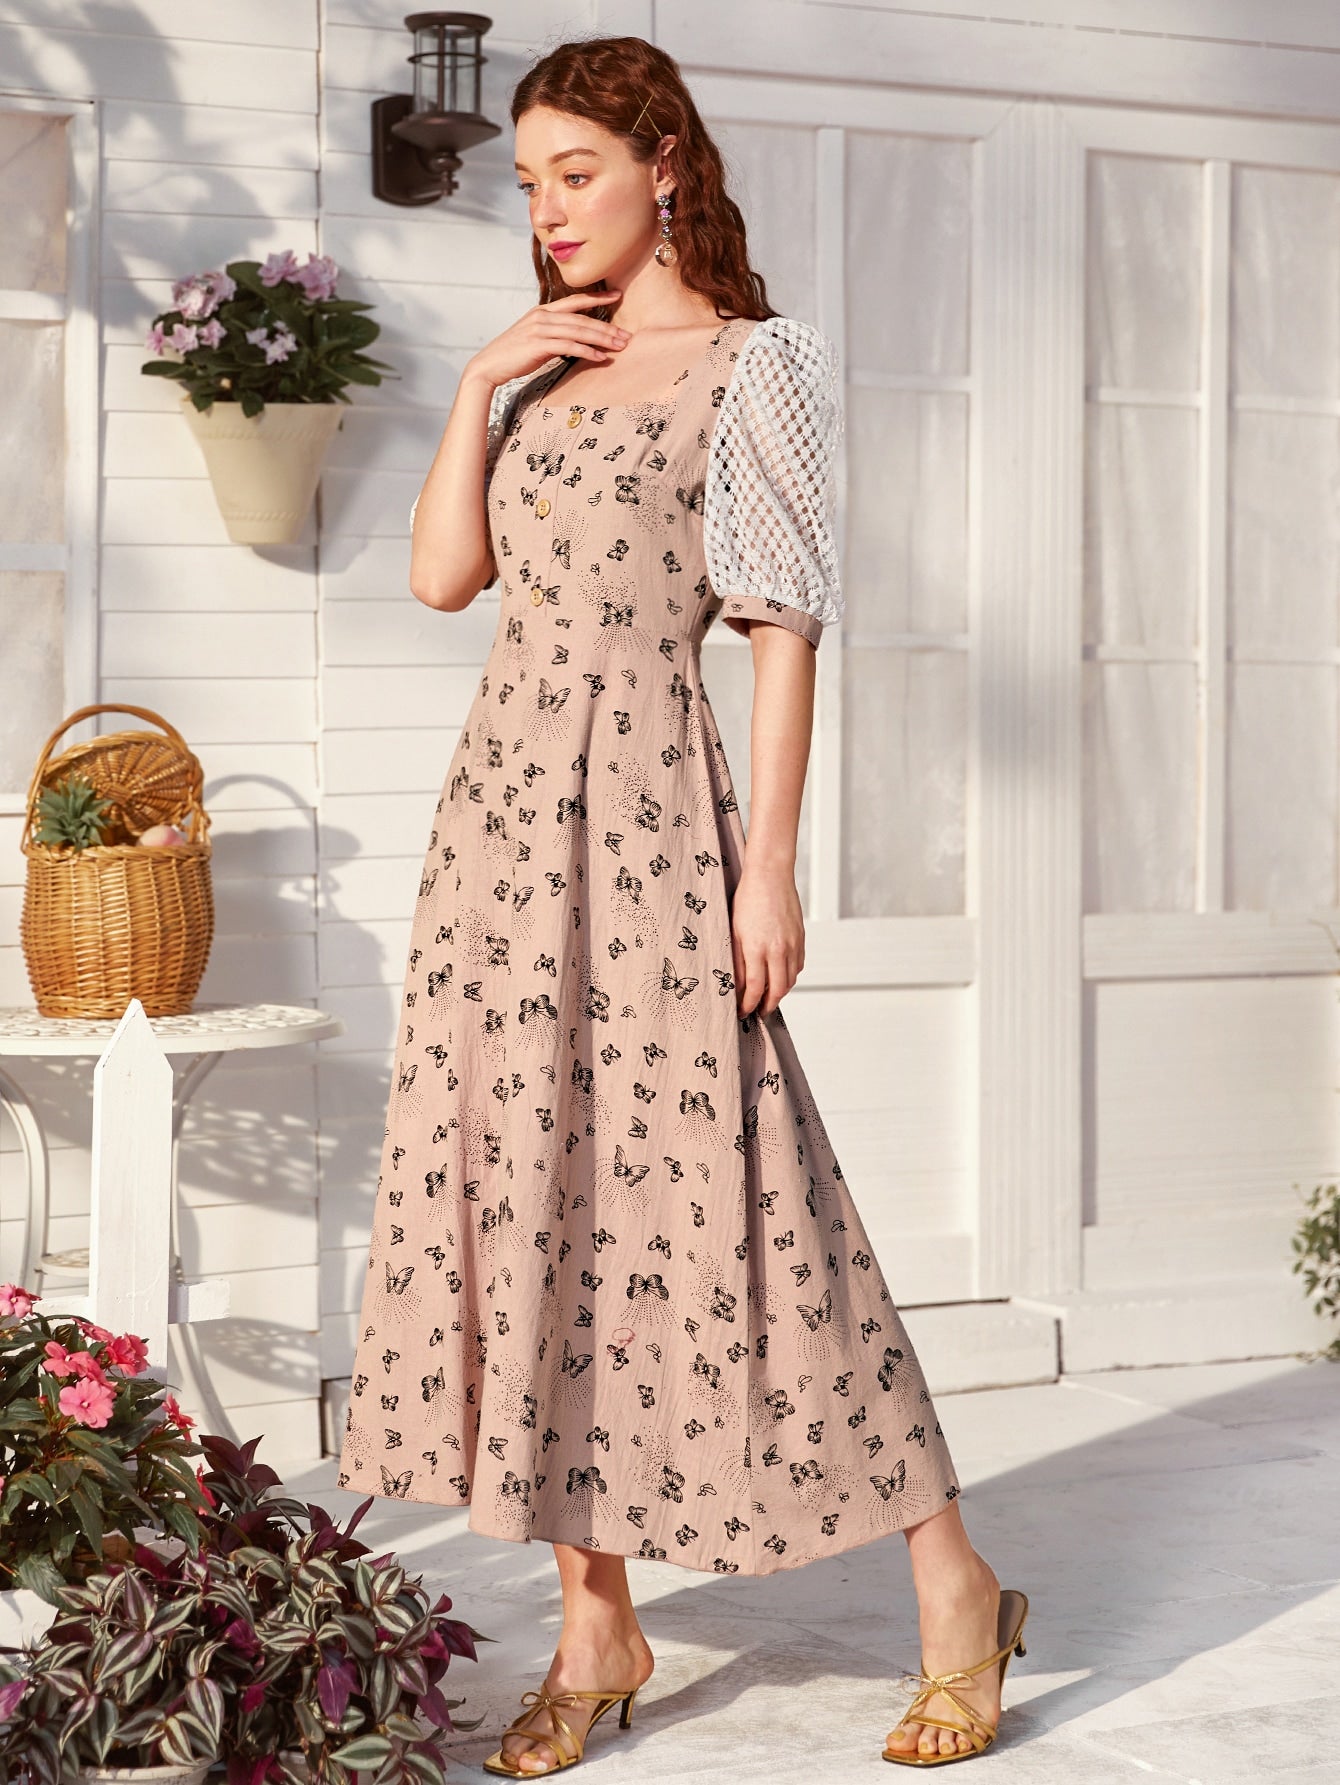 Butterfly Print Square Neck Contrast Lace Sleeve Dress